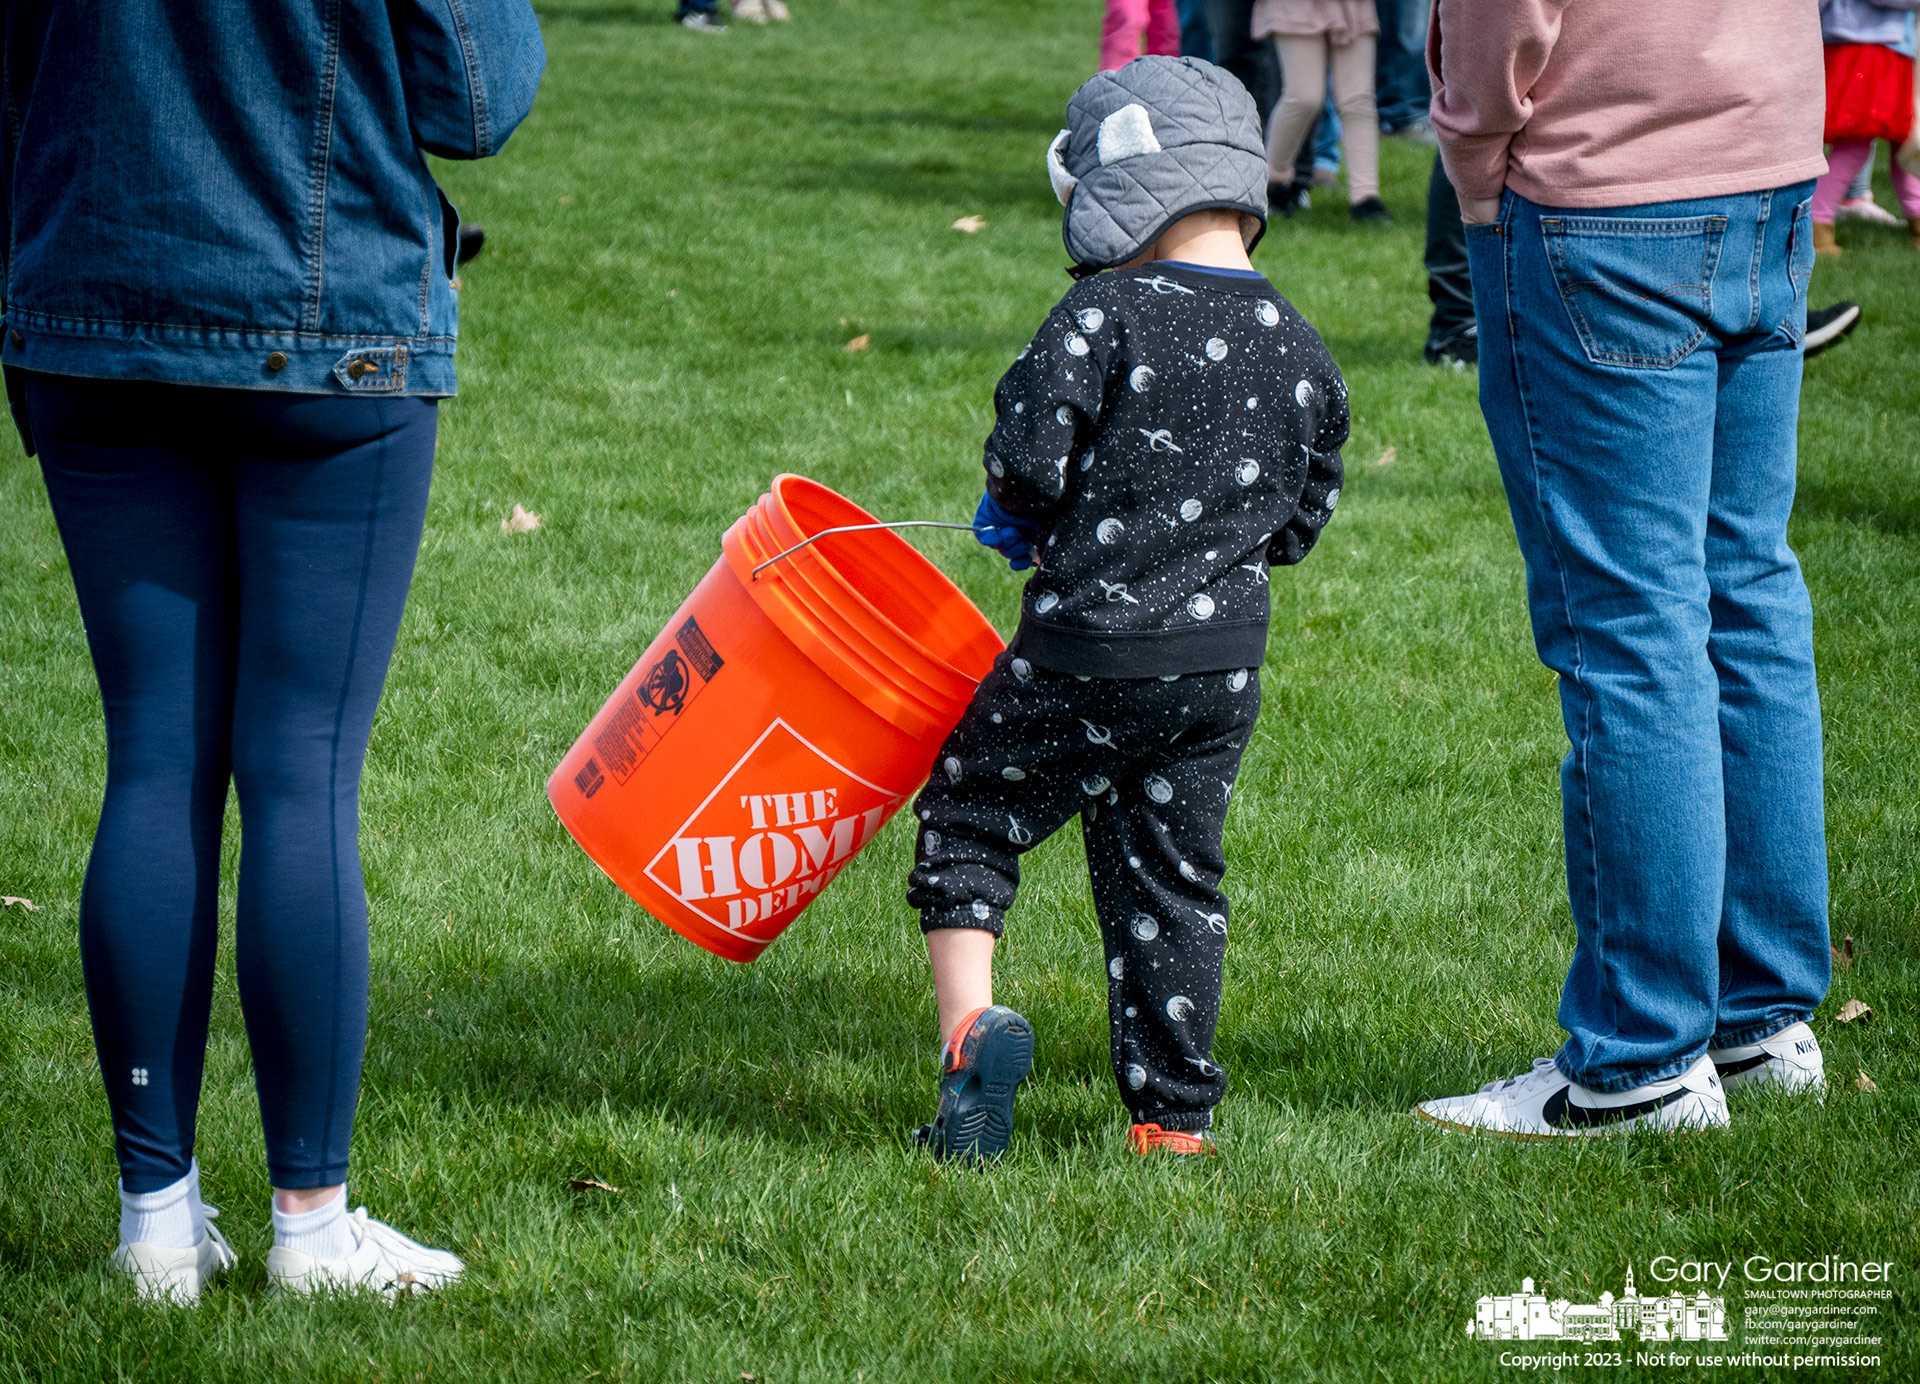 A young Easter egg hunter showed up with a five-gallon bucket to hold his collection of eggs at the city's Spring Eggstravaganza at Hoff Woods Park. My Final Photo for April 8, 2023.